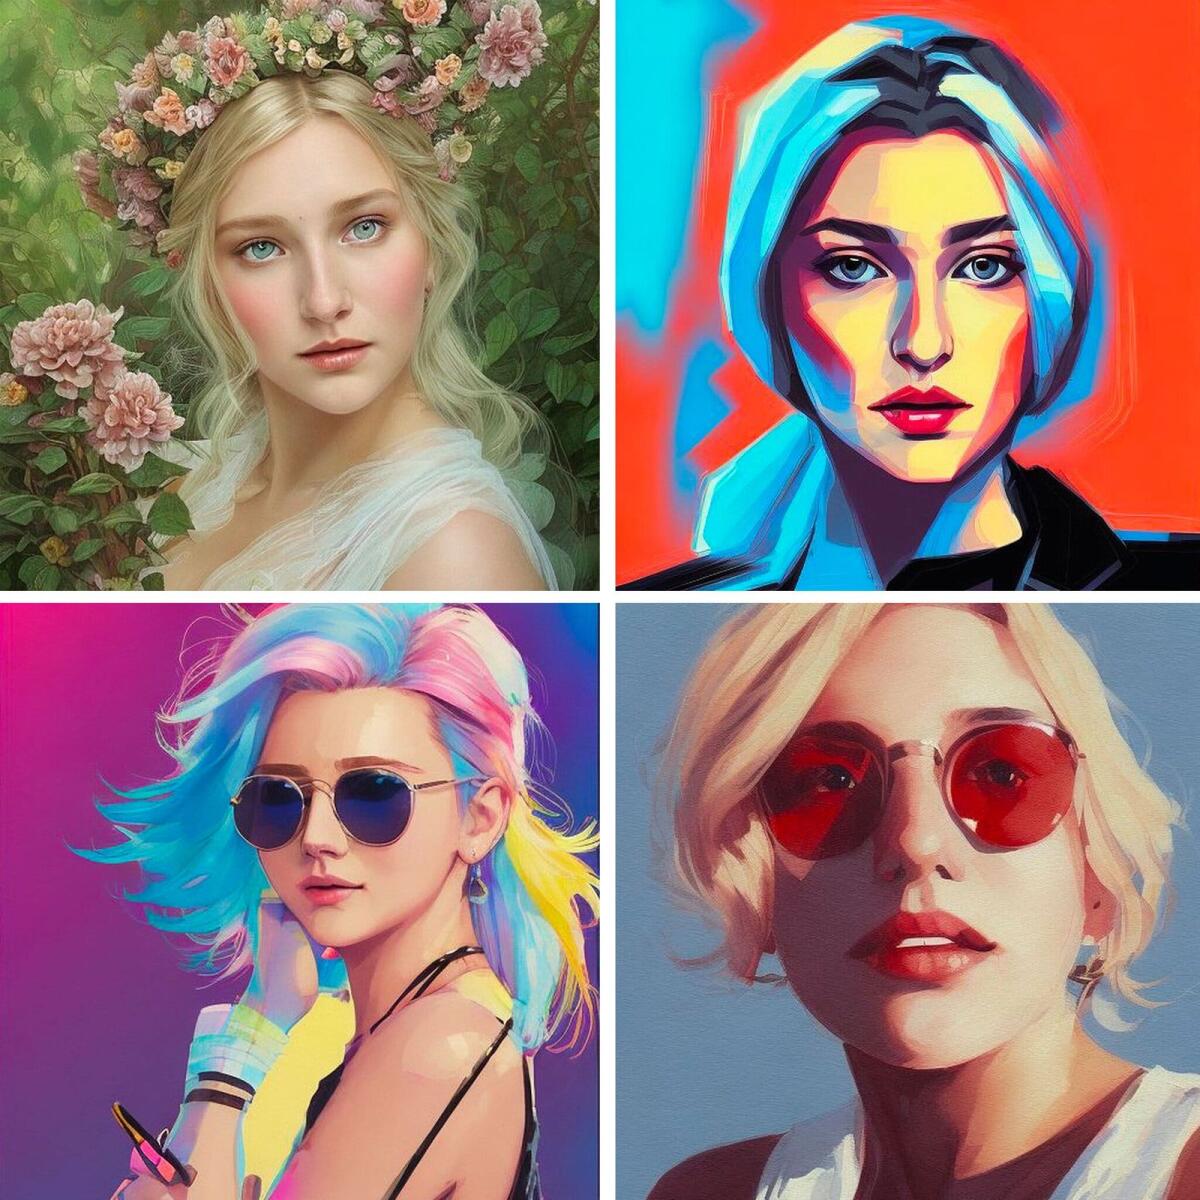 Lensa AI, a popular iPhone app, uses your selfies and artificial intelligence to create portraits in a variety of styles.Credit...Lensa AI